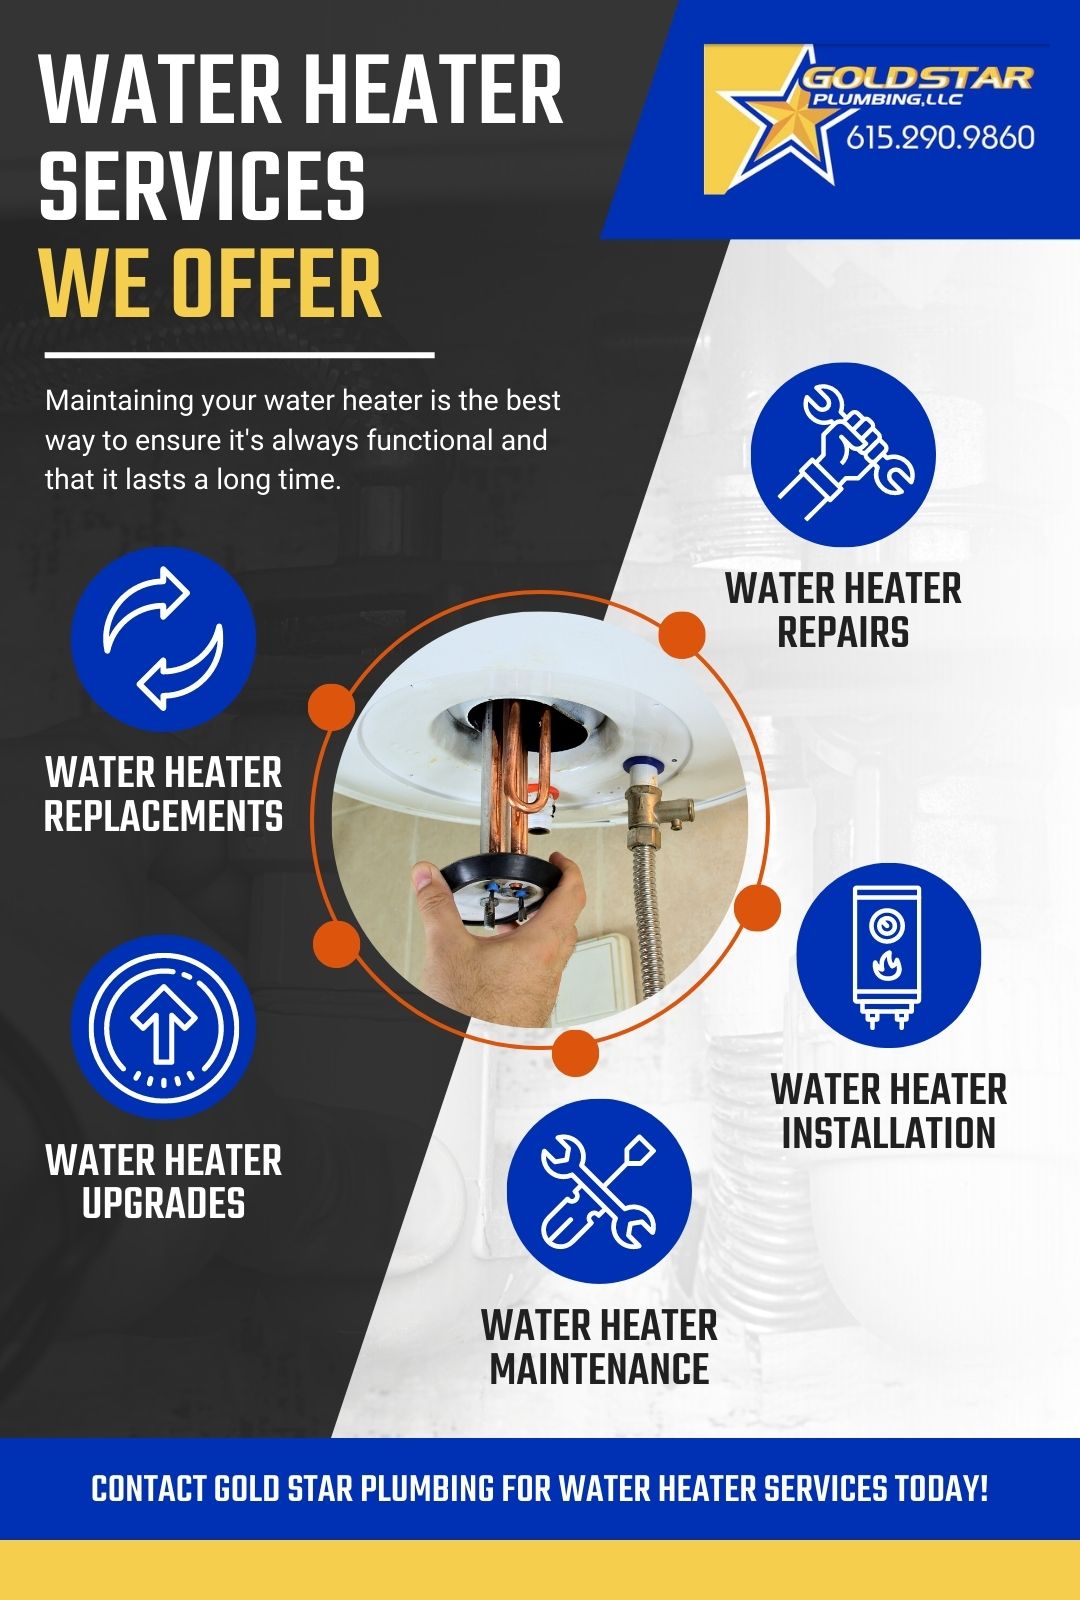 Water Heater Services We Offer